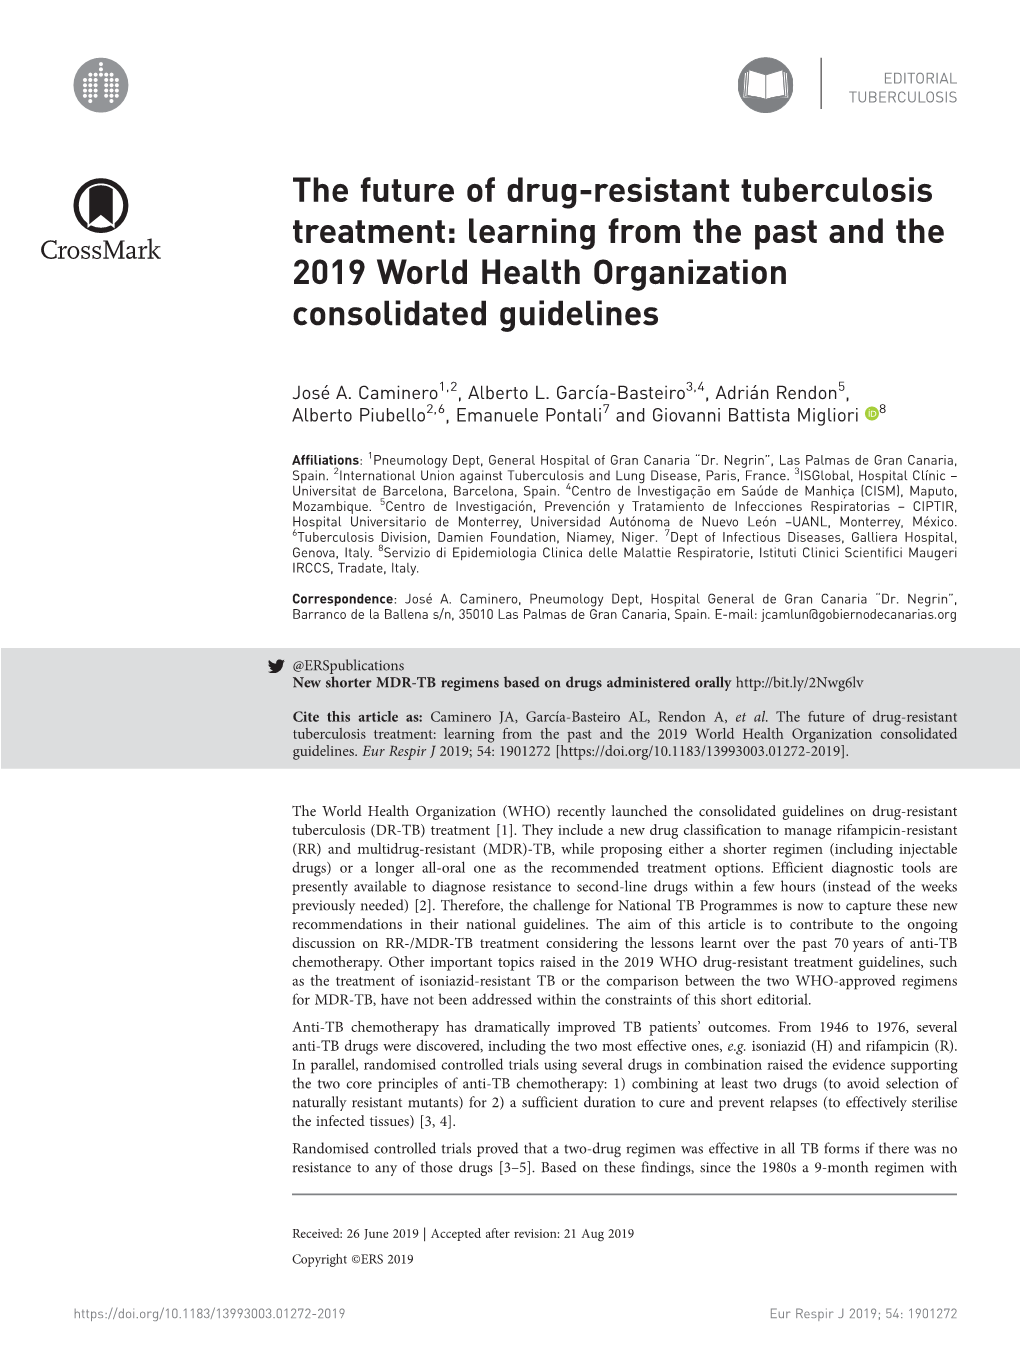 The Future of Drug-Resistant Tuberculosis Treatment: Learning from the Past and the 2019 World Health Organization Consolidated Guidelines